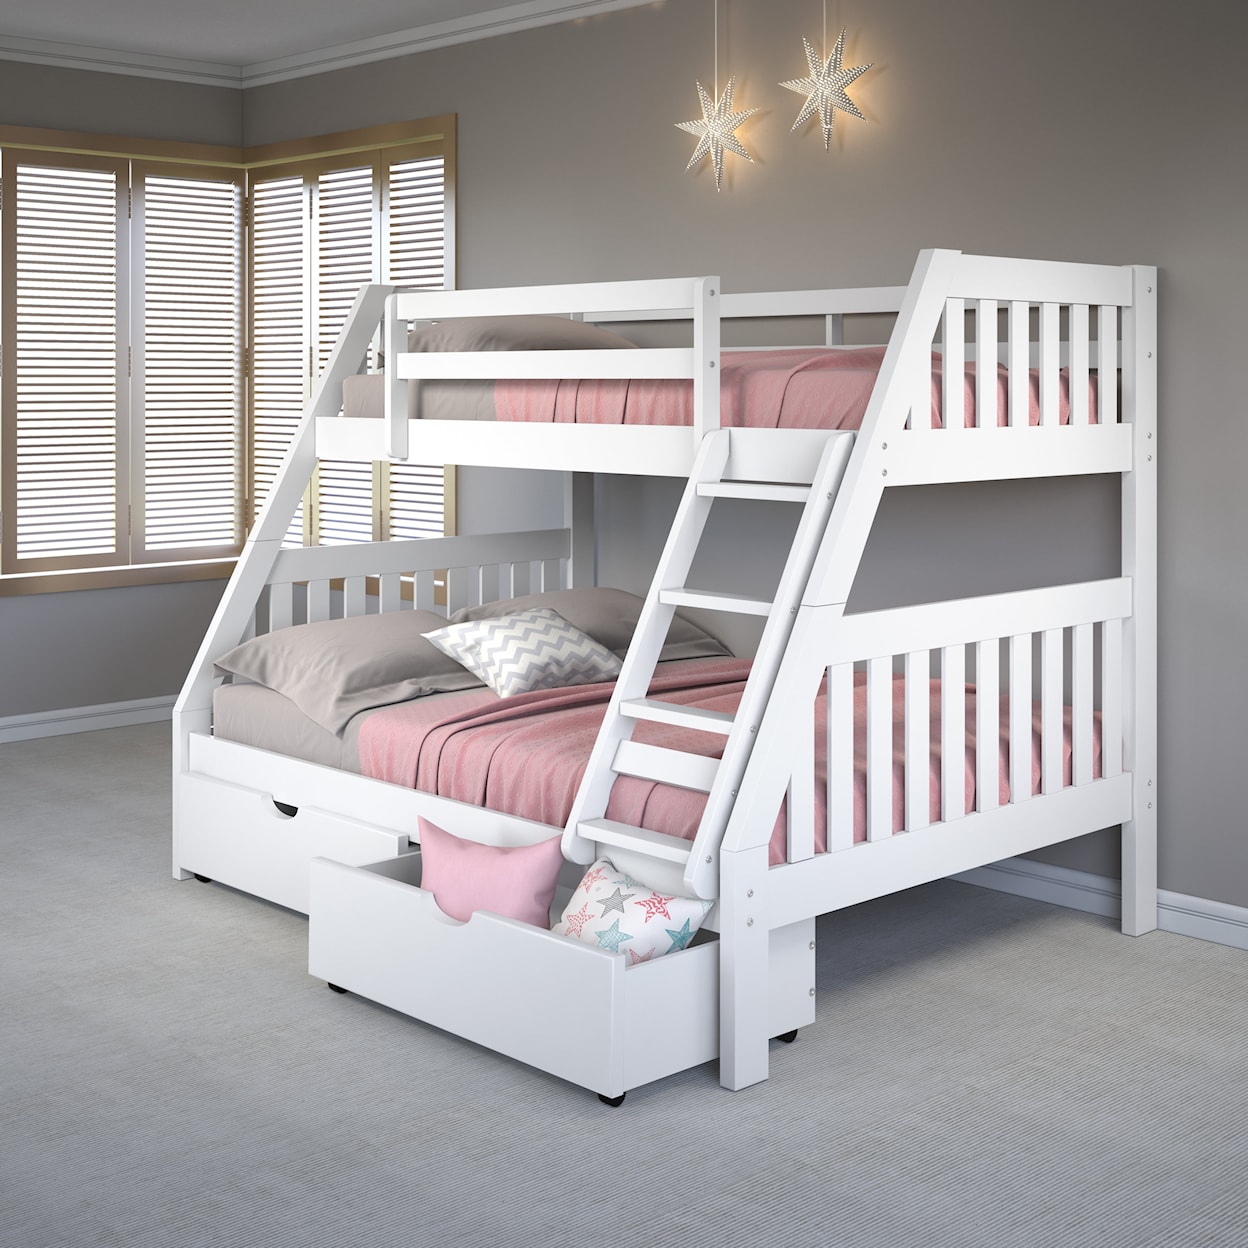 Donco Trading Co Loft Beds Twin/Full Bunk Bed